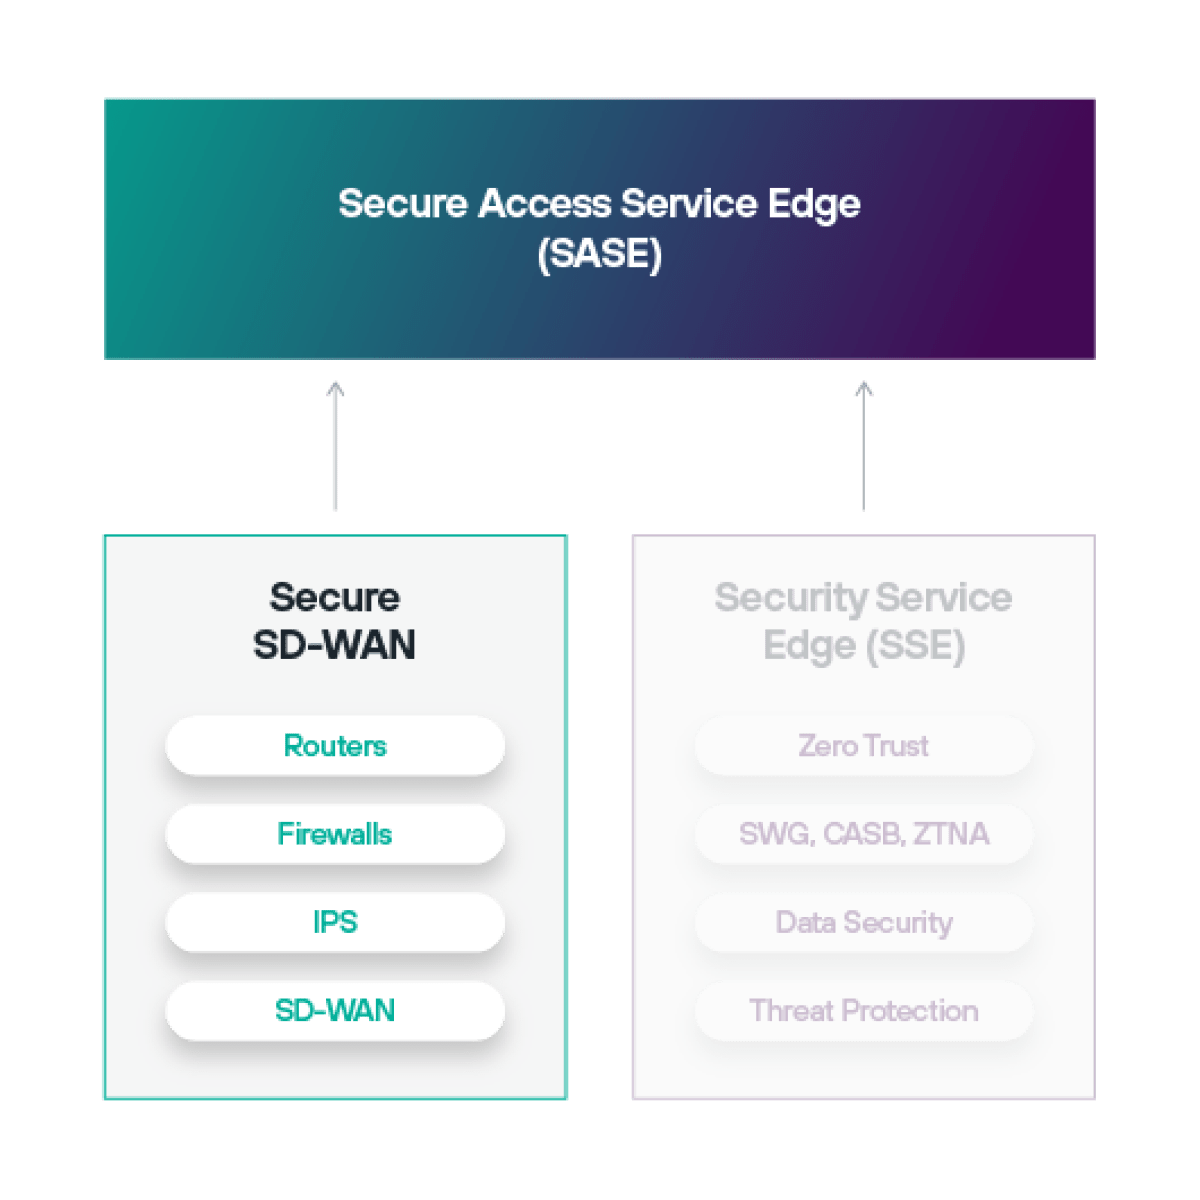 Software-Defined Wide Area Networking (SD-WAN) is part of the Secure Access Service Edge (SASE) architecture.